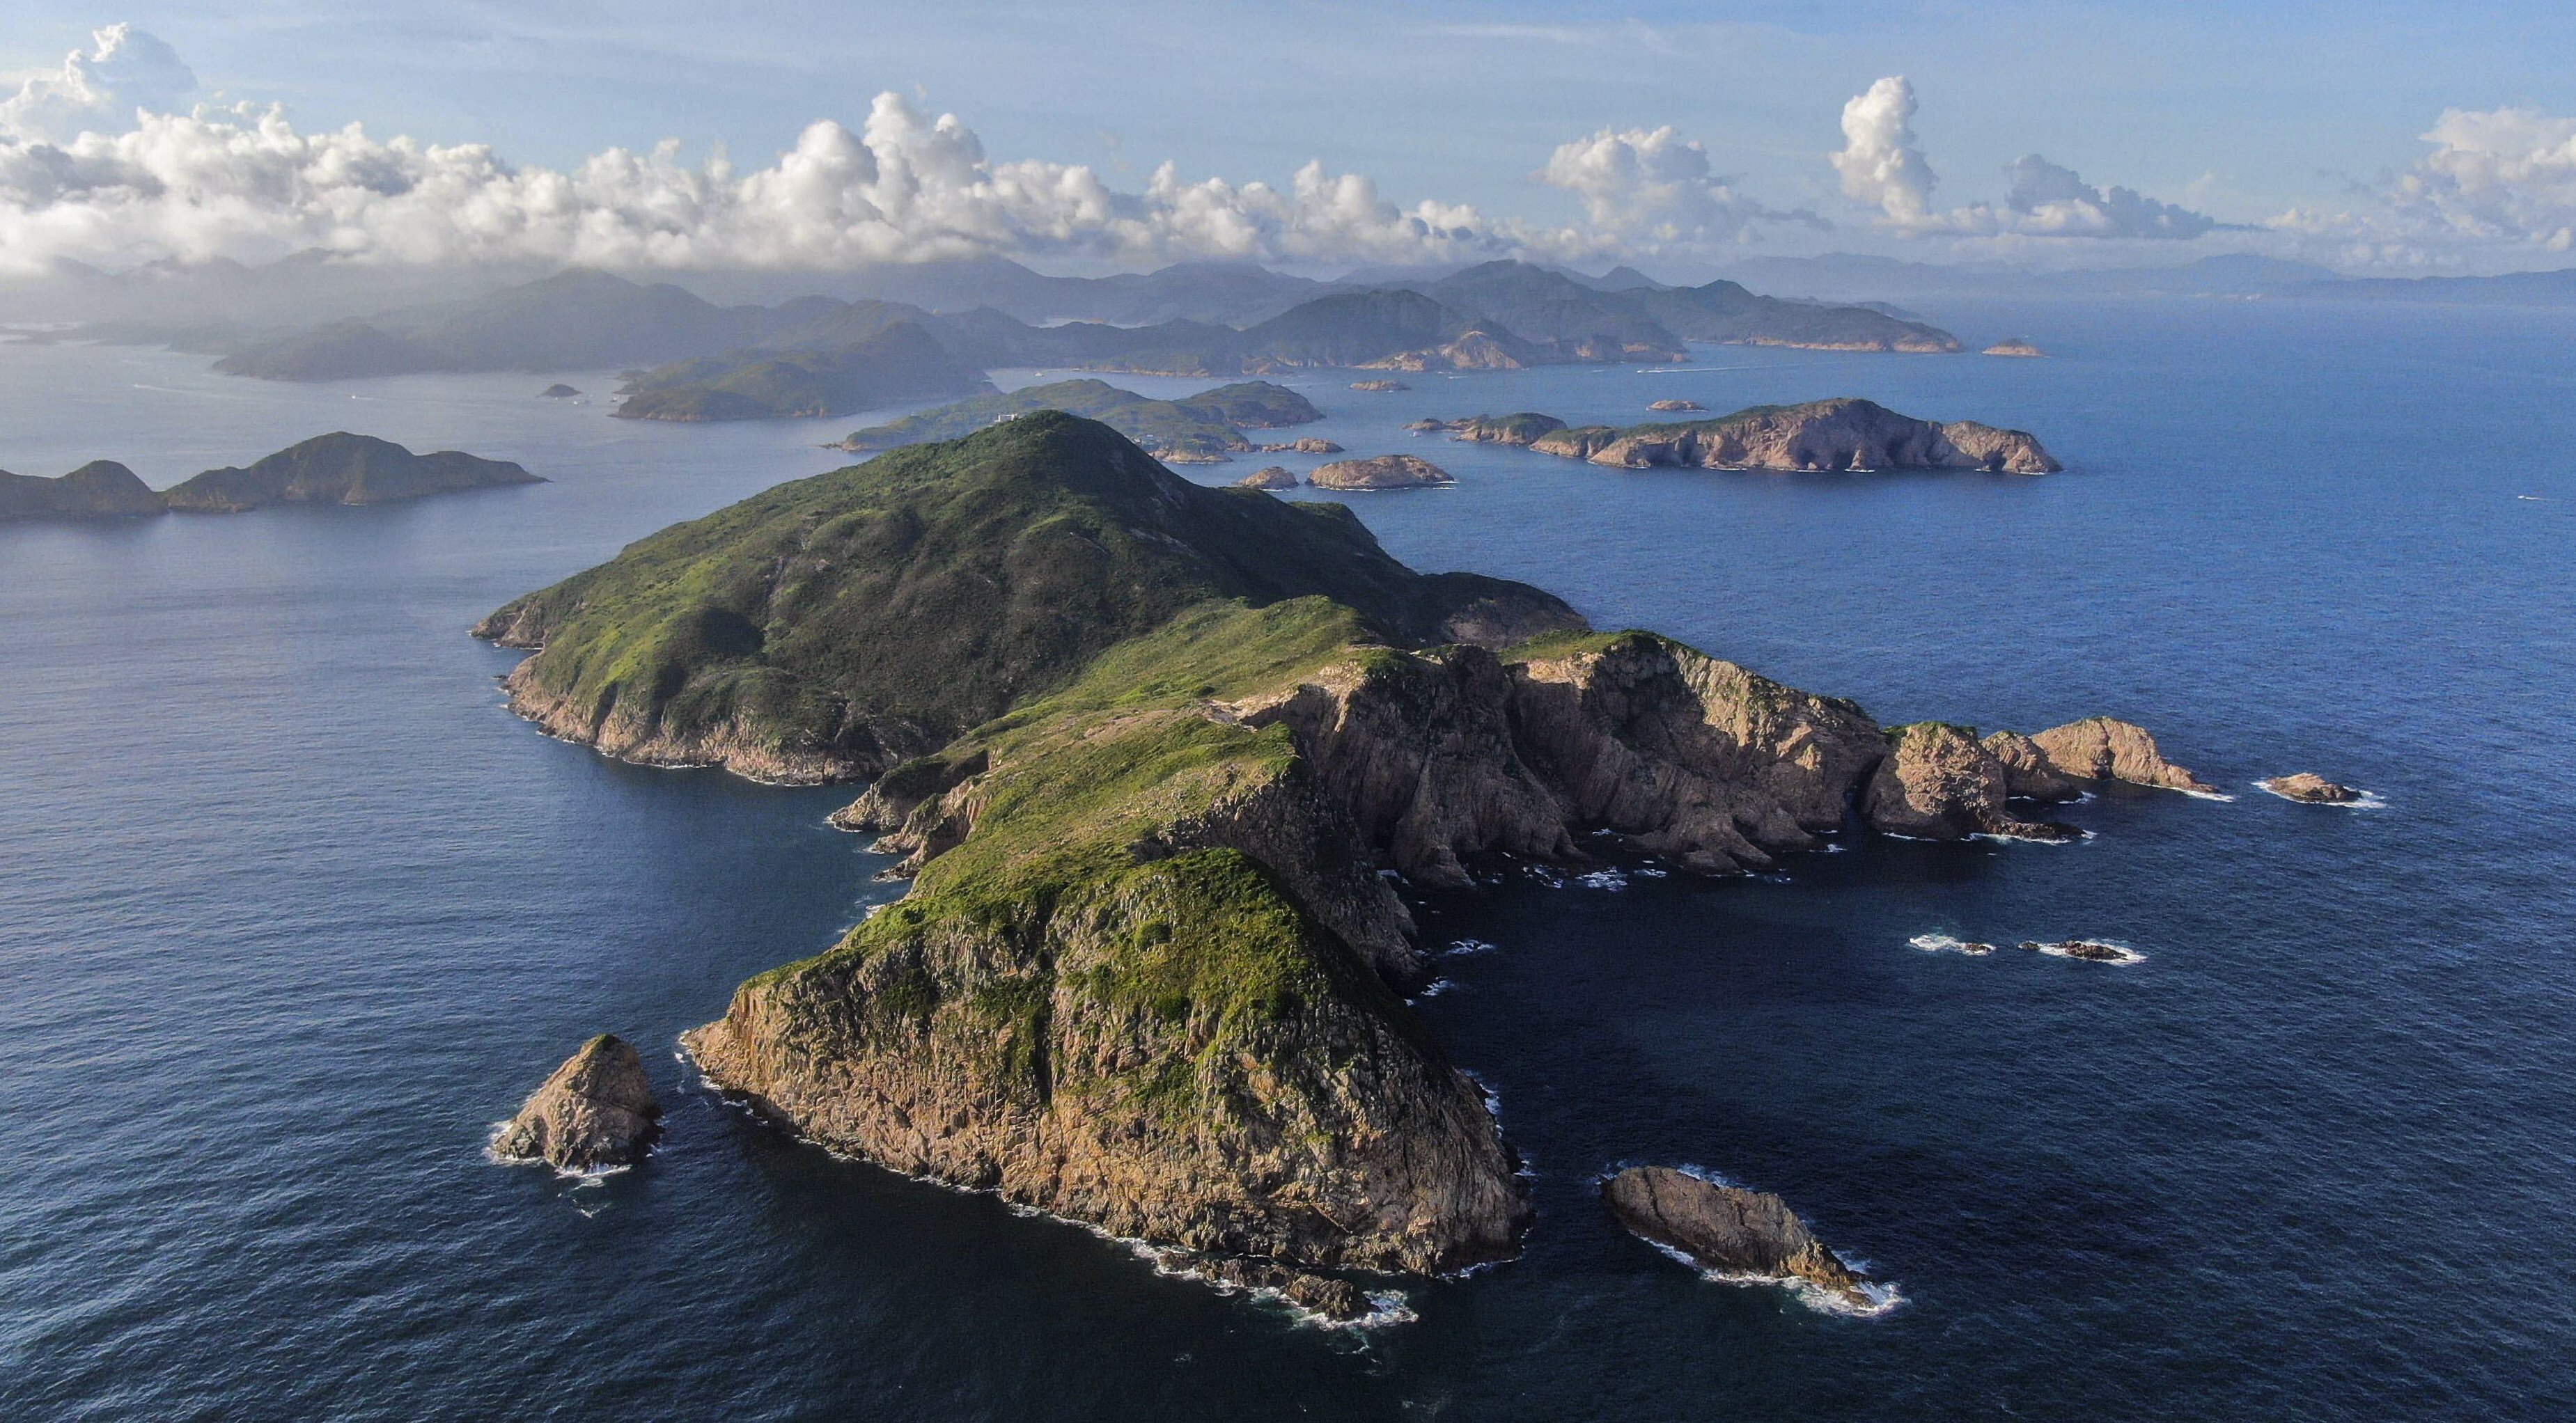 Basalt Island (above) is one of more than 200 islands in Hong Kong waters. Most are undeveloped, uninhabited and a short boat trip from the city. Photo: Martin Chan